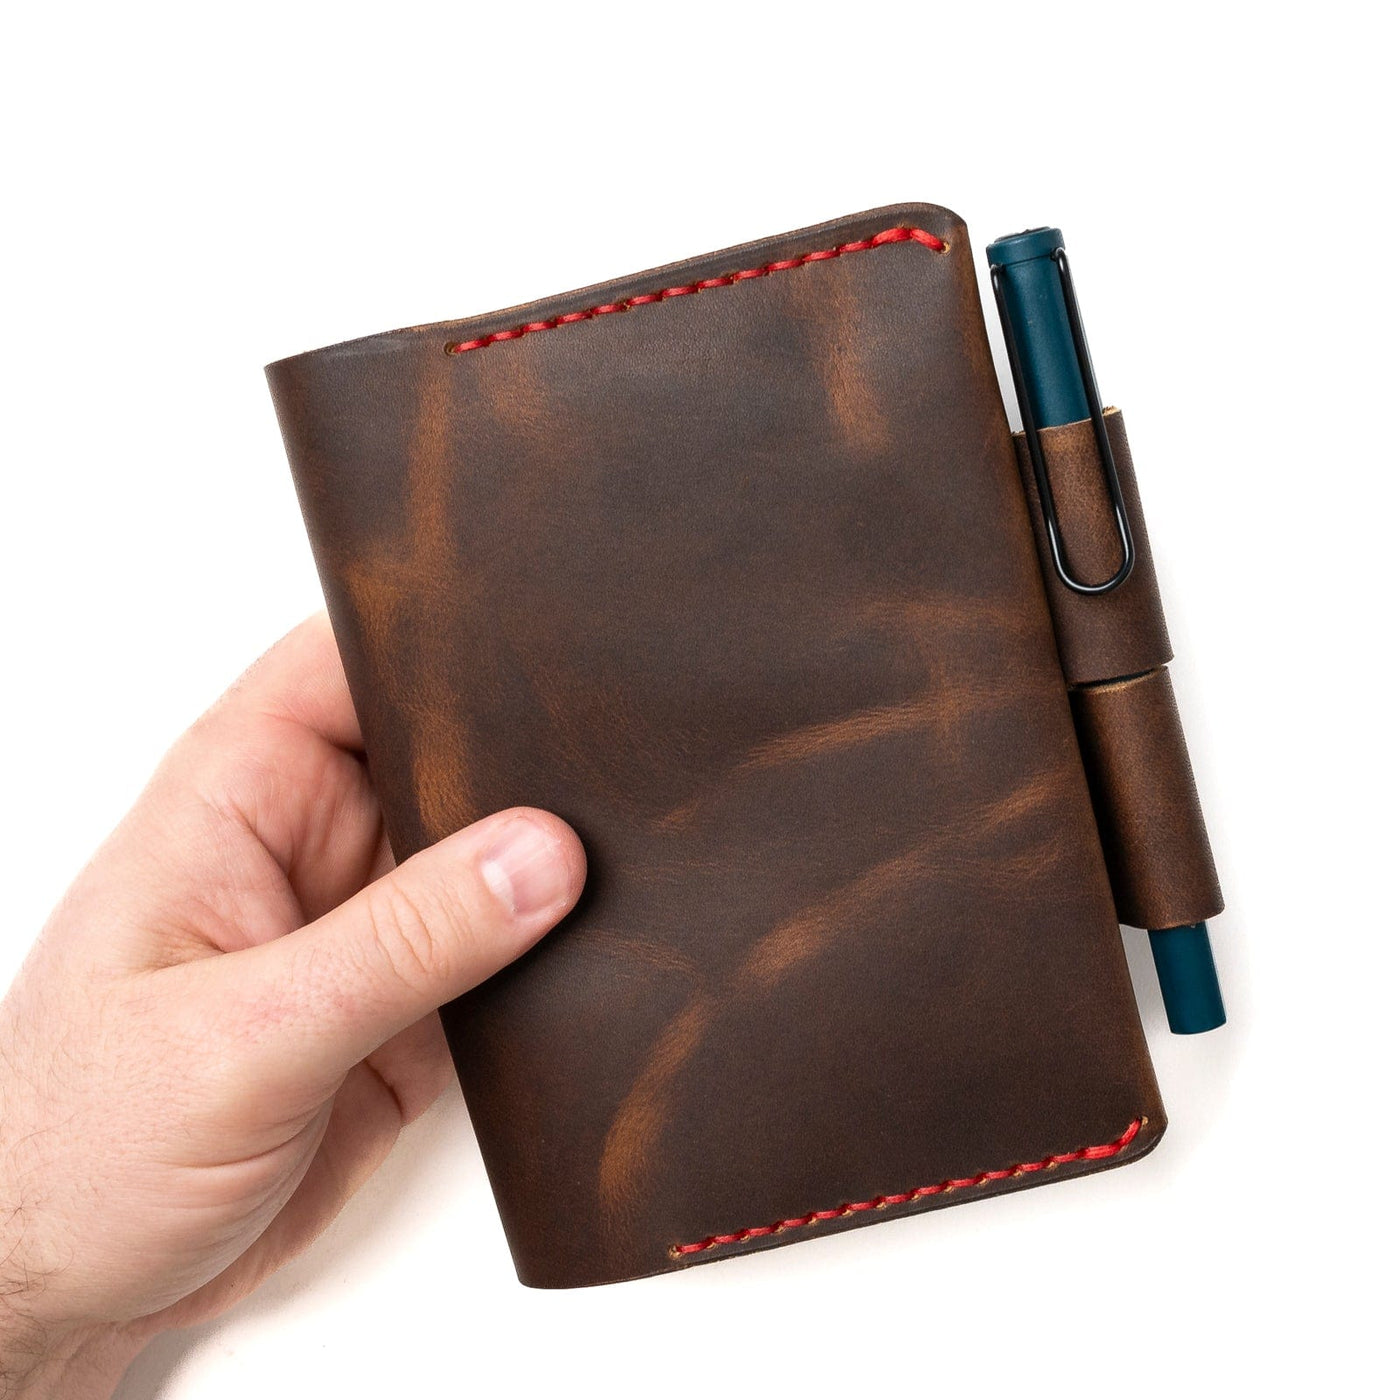 Leather A6 Notebook Cover - Heritage Brown Popov Leather